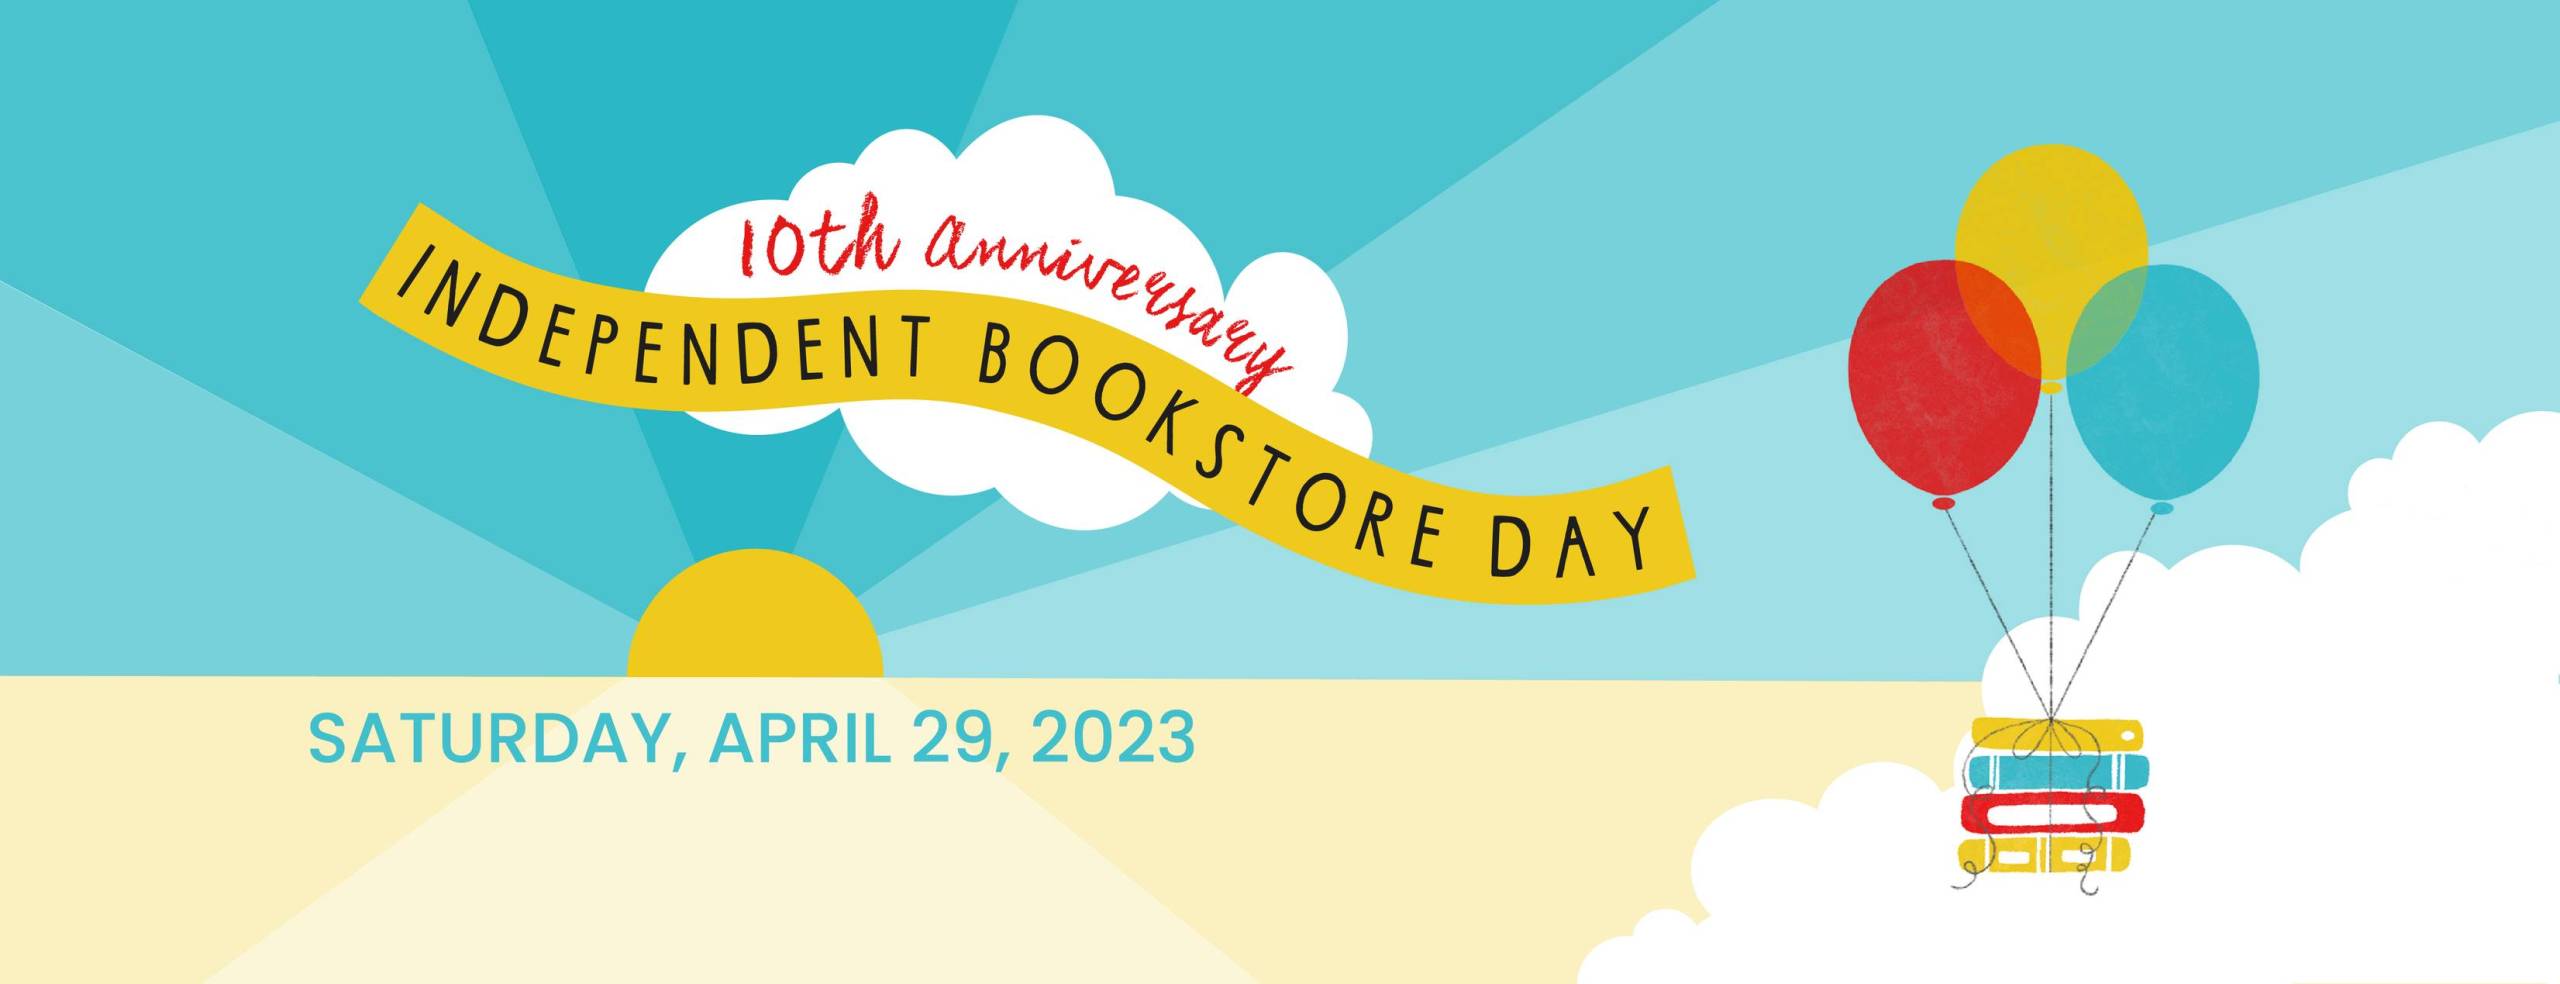 Indie Bookstore Day 2023 at Bobzbay Books